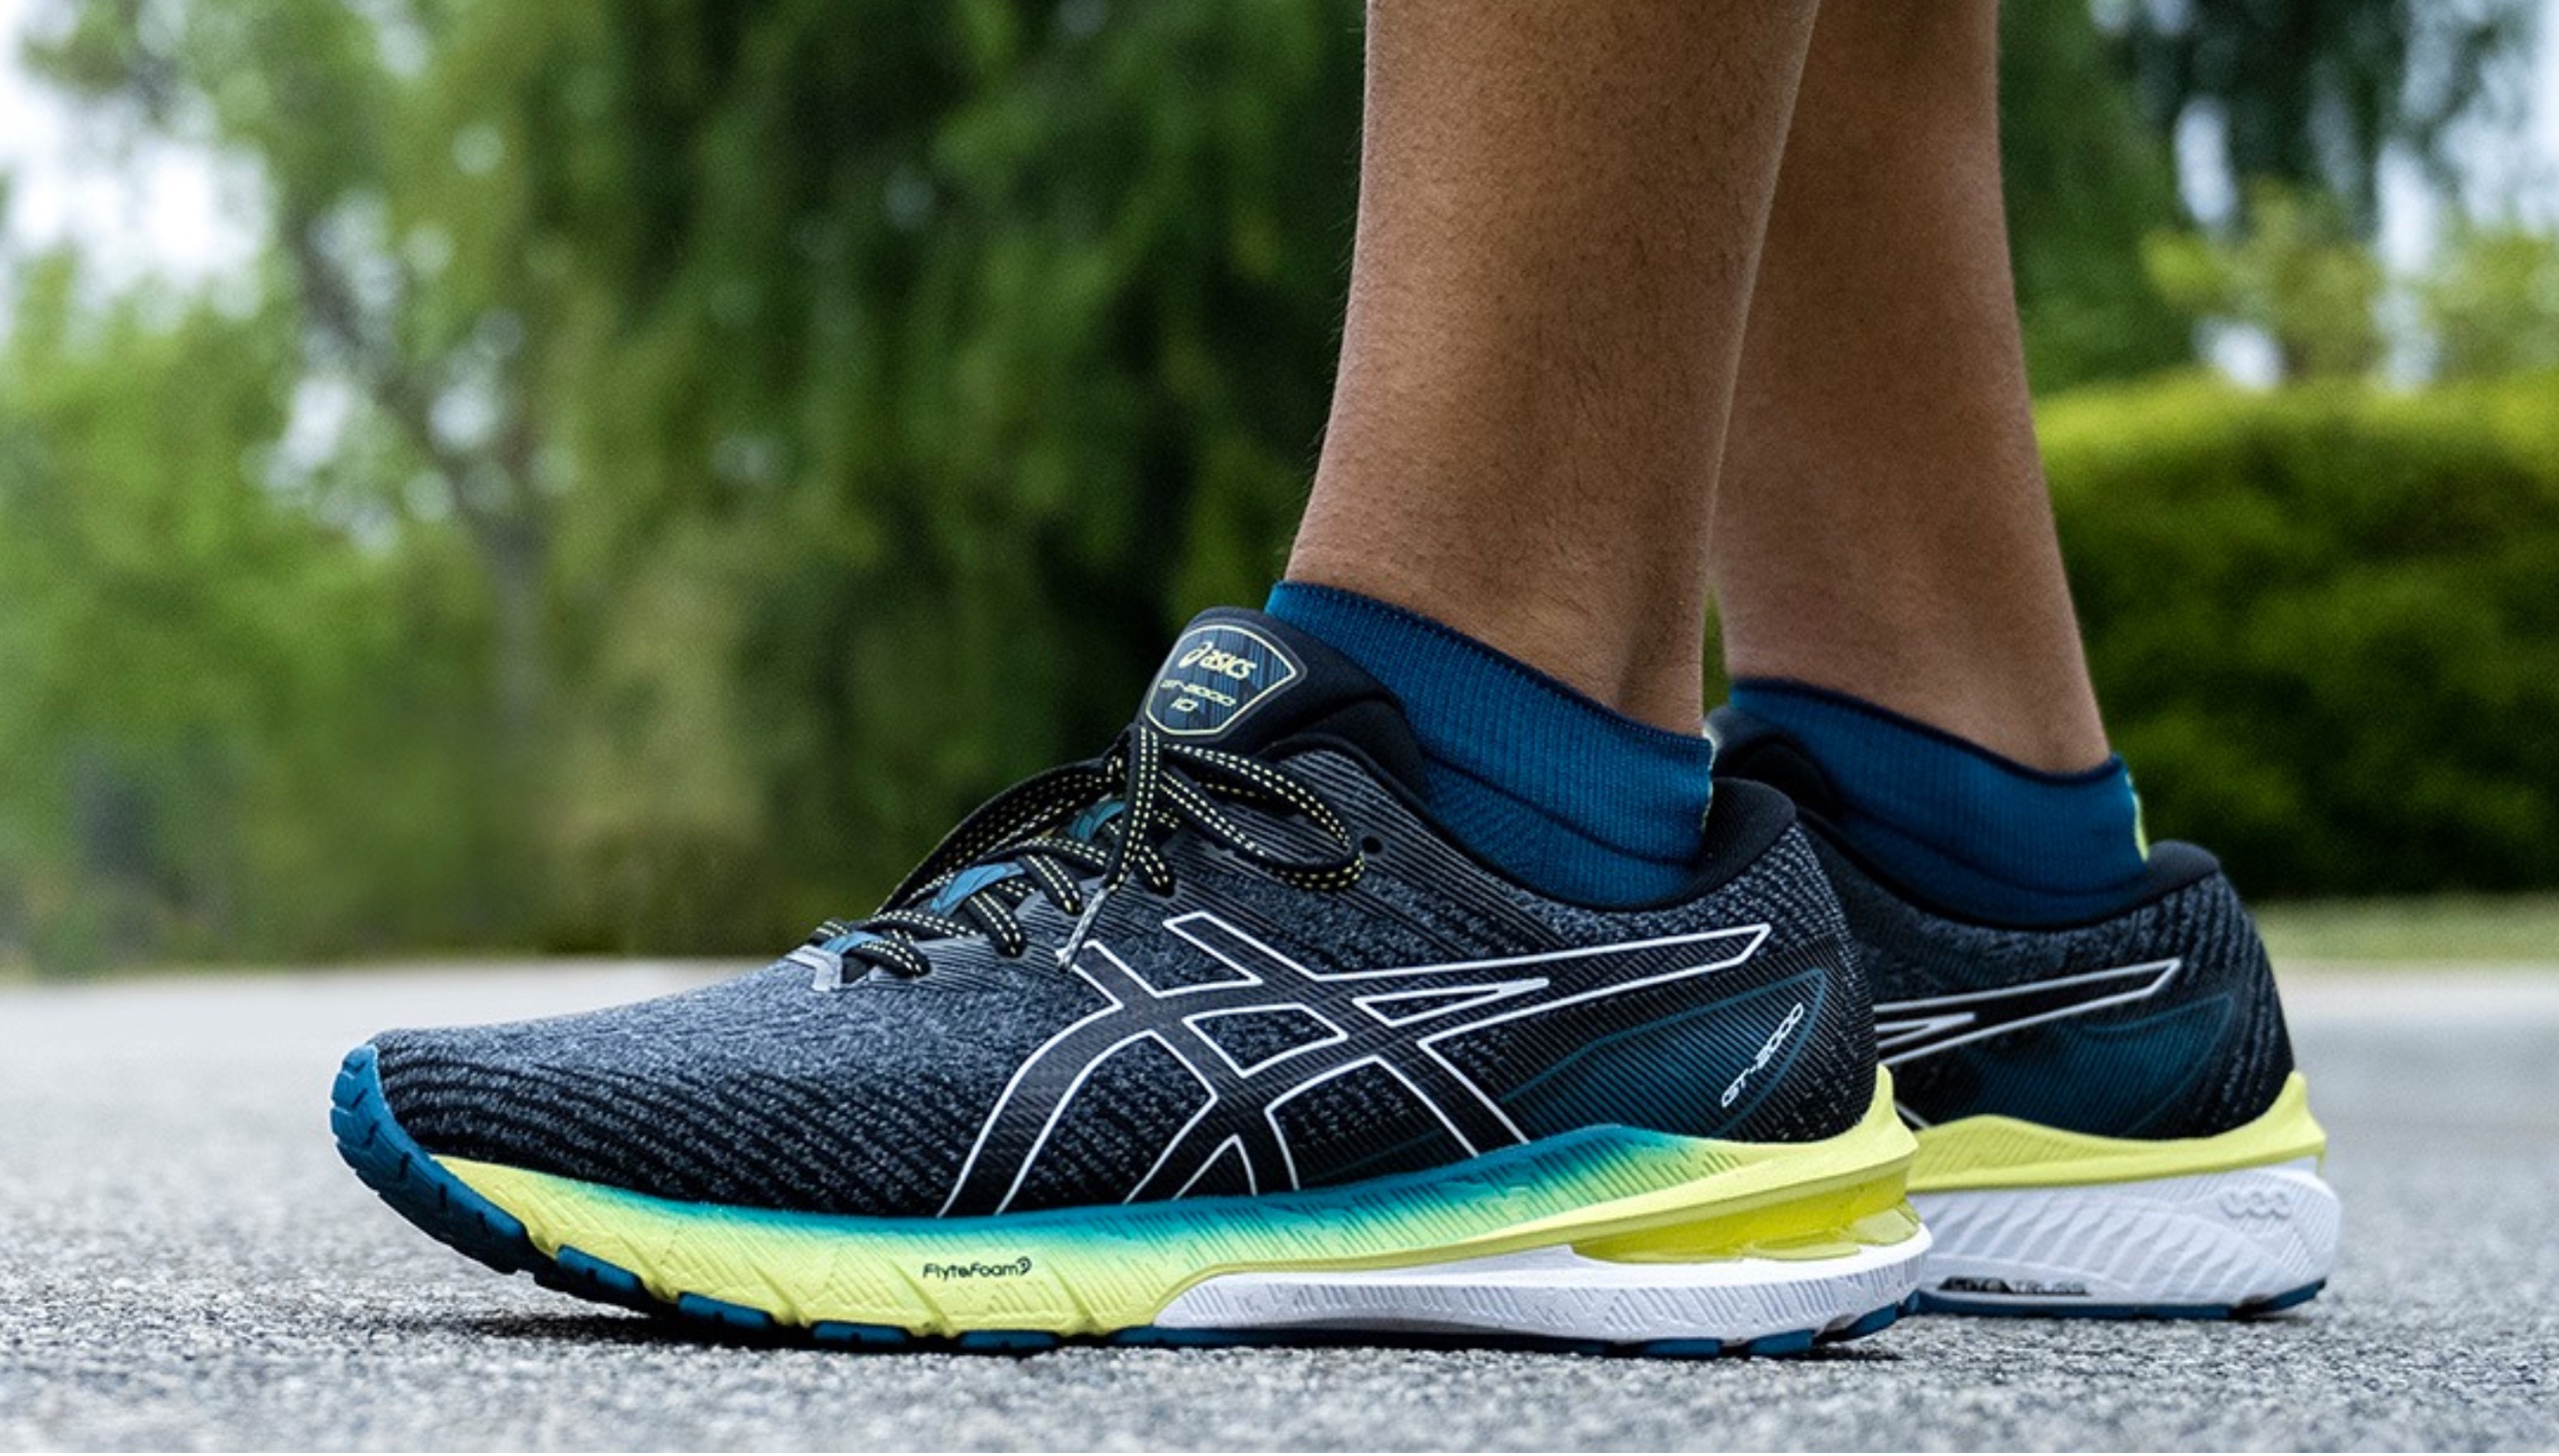 ASICS Semi-Annual Sale takes up to 60% off and extra 25% off select styles